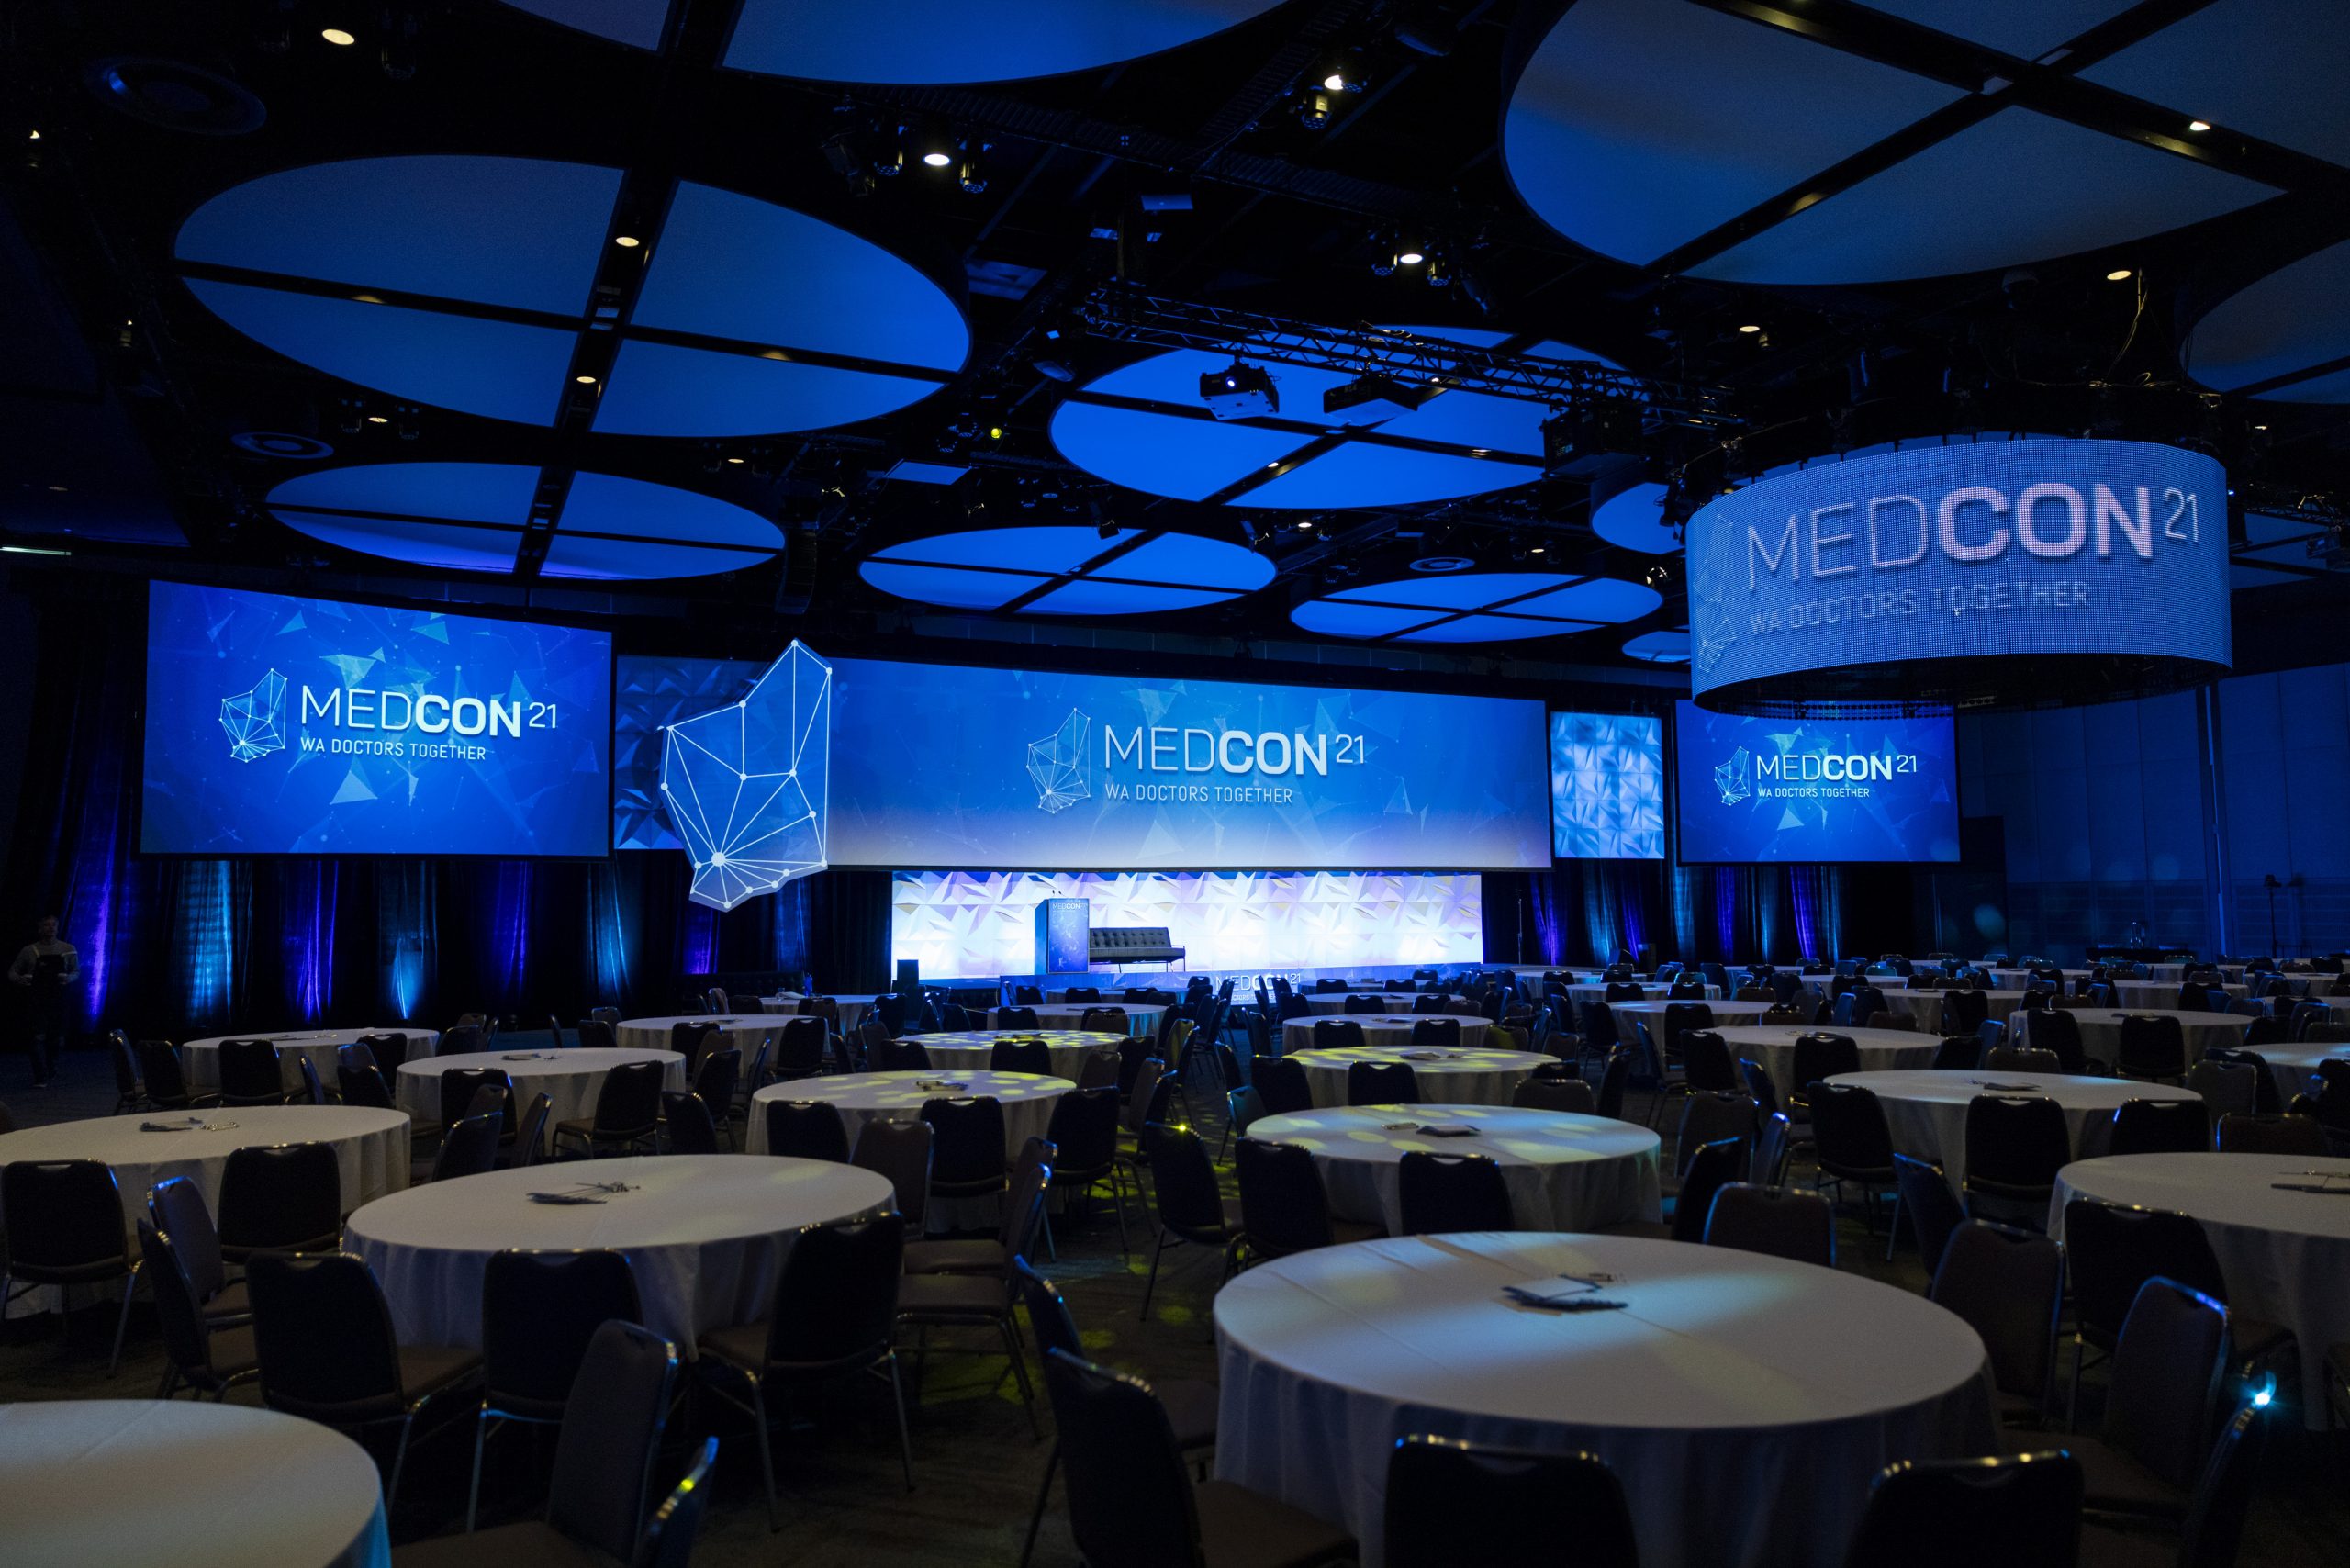 event and conference co medcon21